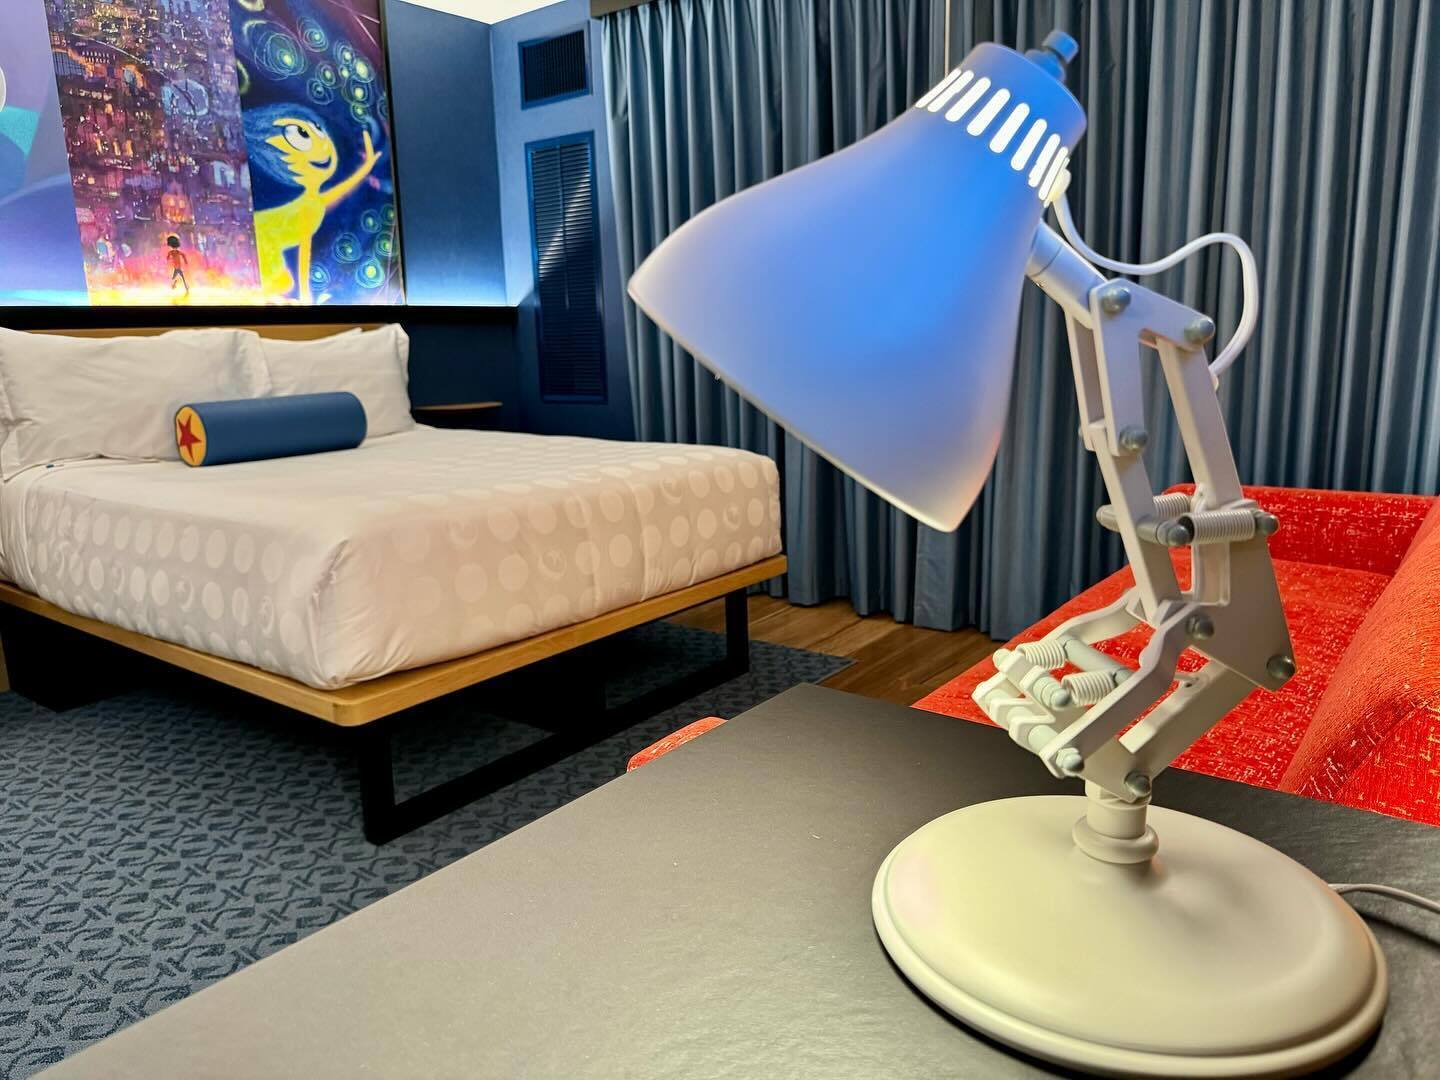 In the USA, a hotel themed around Pixar animation characters has been unveiled